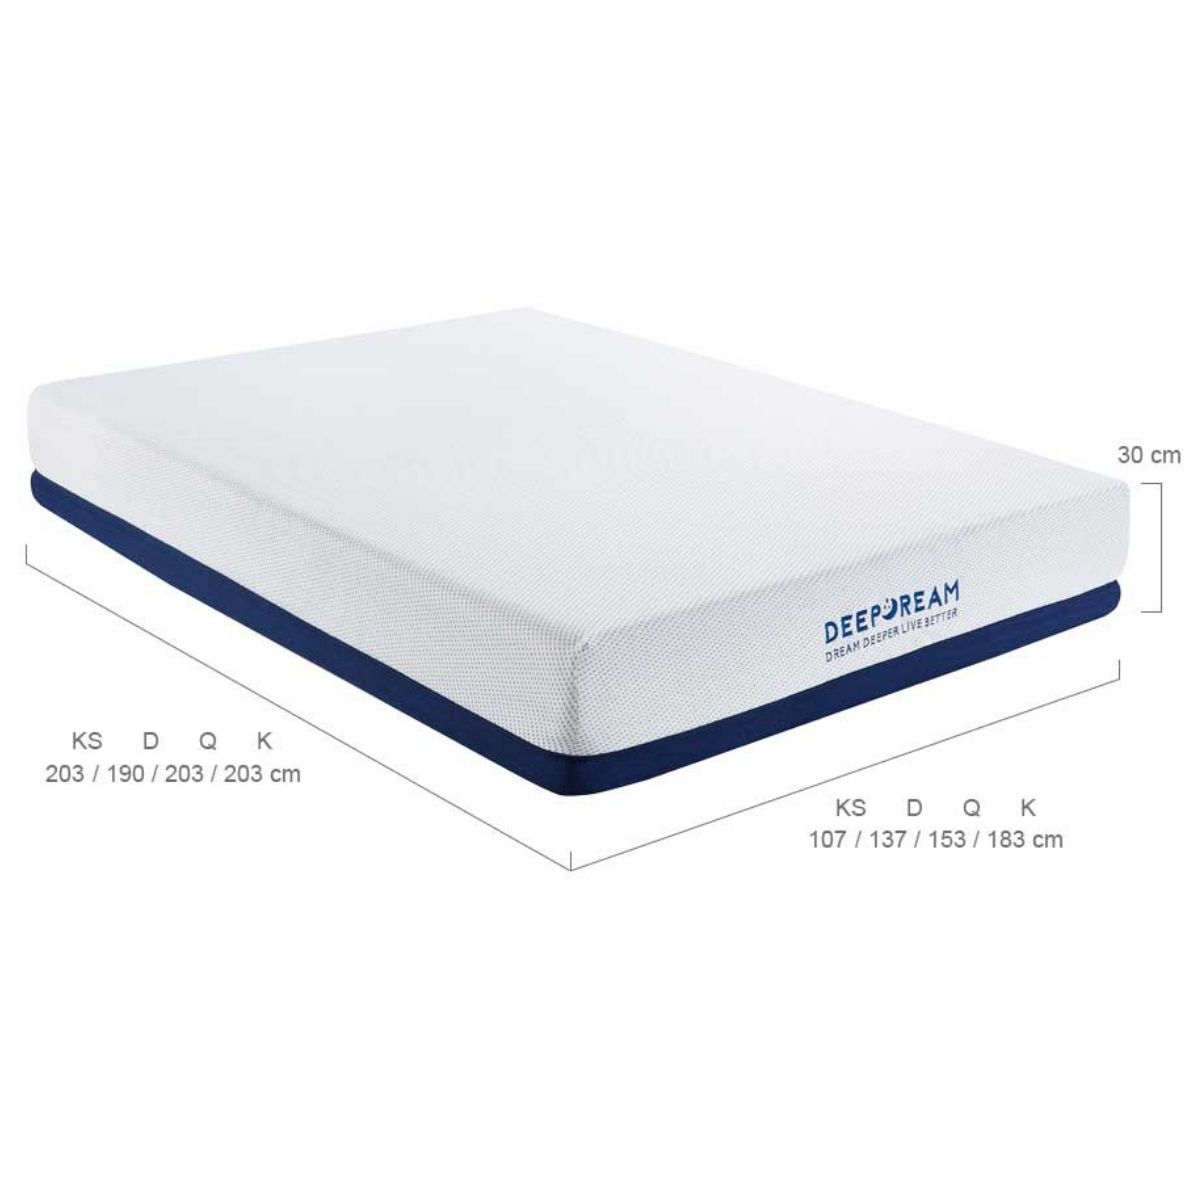 King-sized memory foam mattress with dimensions displayed